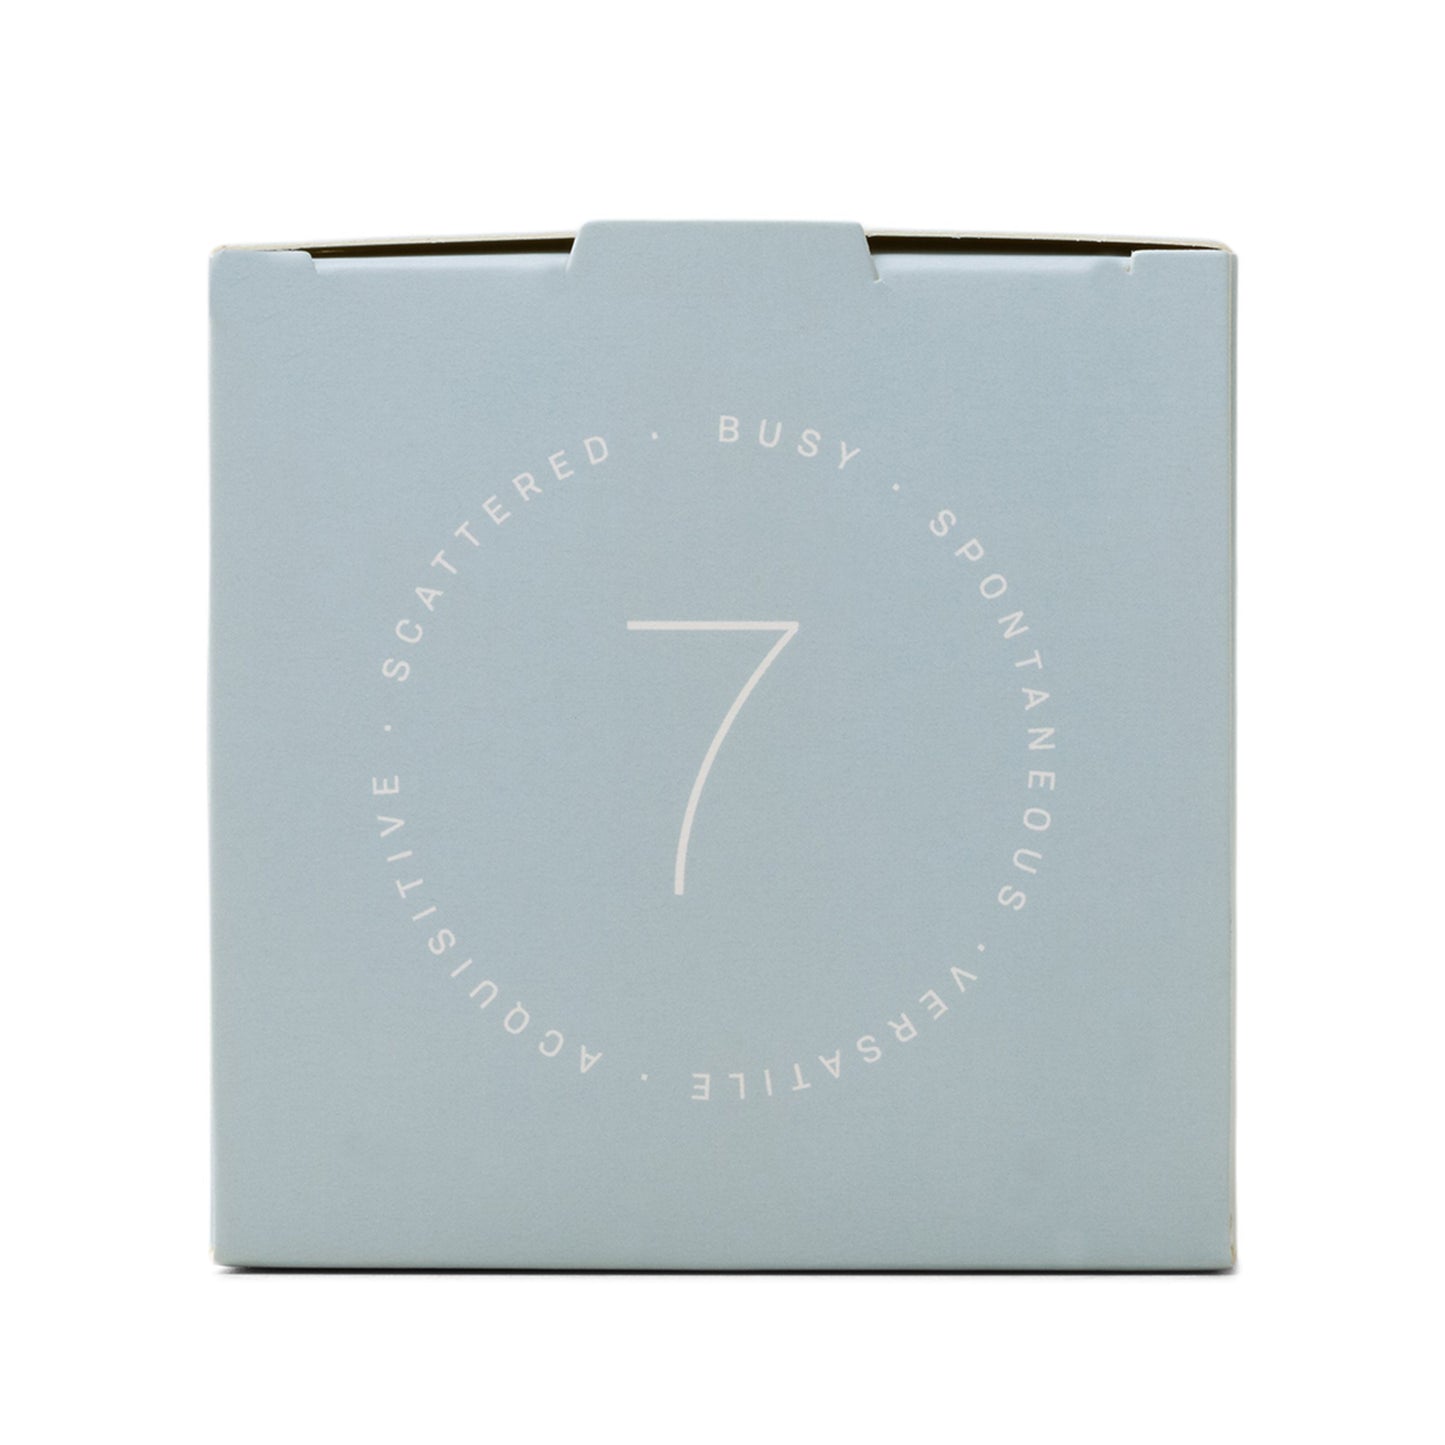 Baby blue box which reads "enthusiast"; also has the number 7 on the side